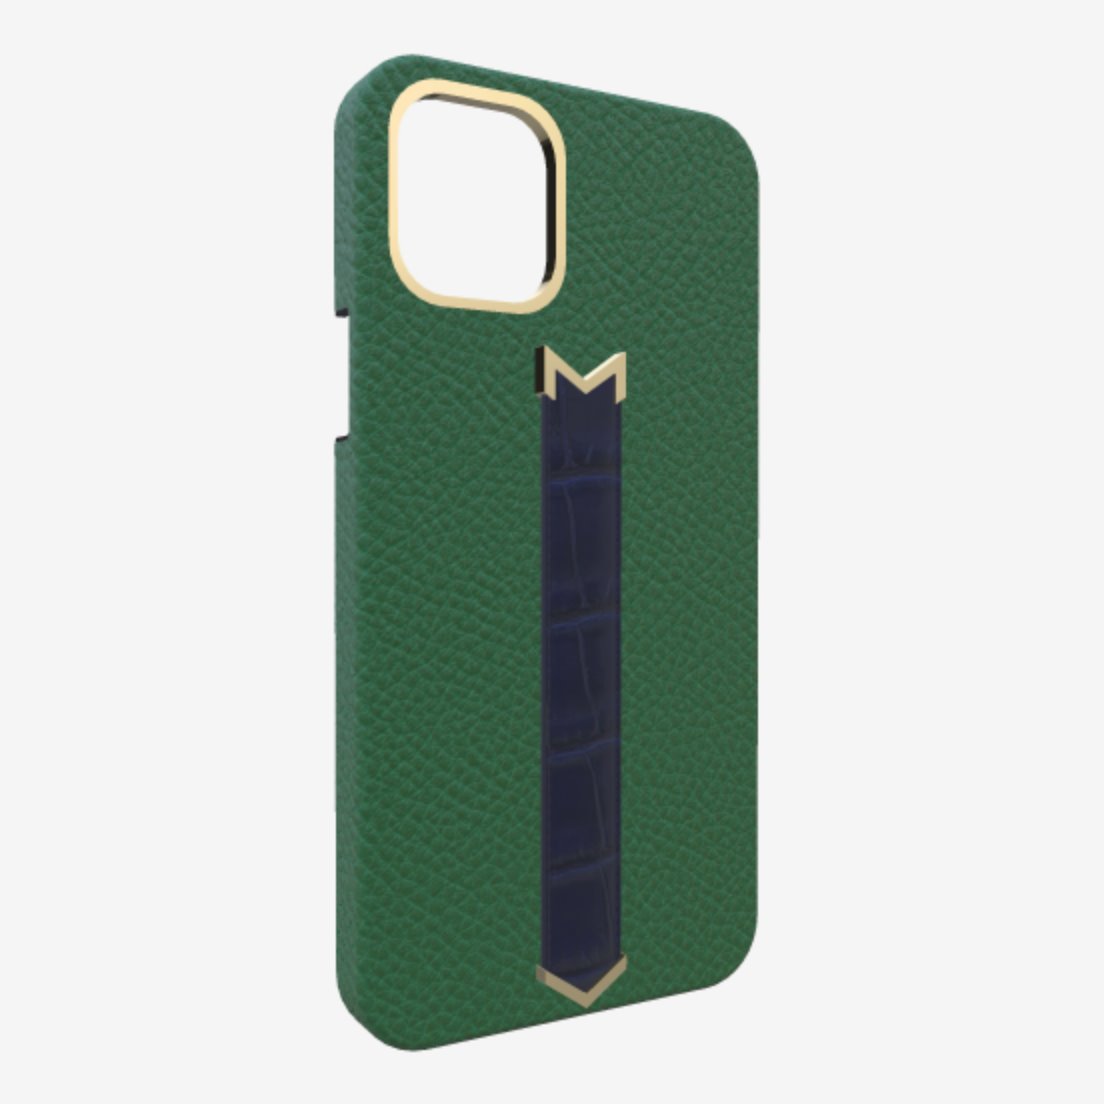 Gold Finger Strap Case for iPhone 13 Pro Max in Genuine Calfskin and Alligator Emerald Green Navy Blue 